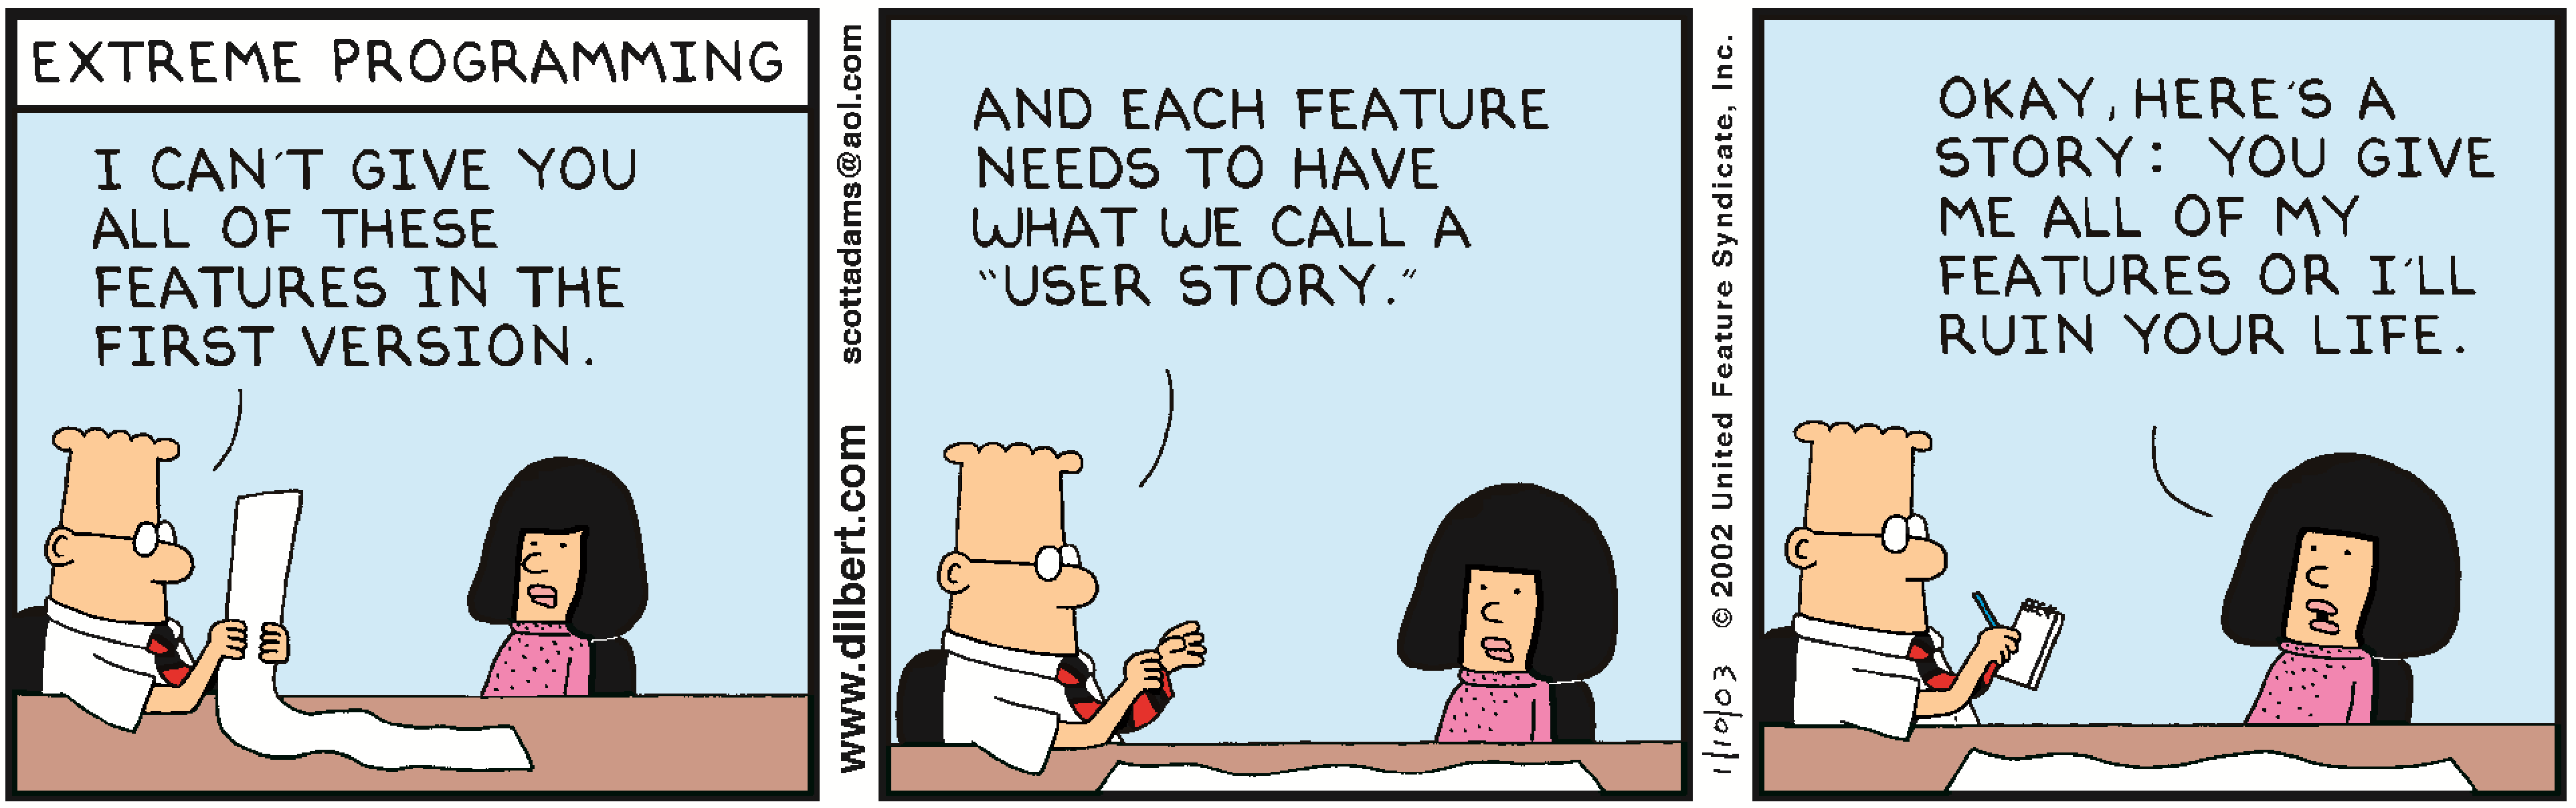 Dilbert_Give_me_all_Features